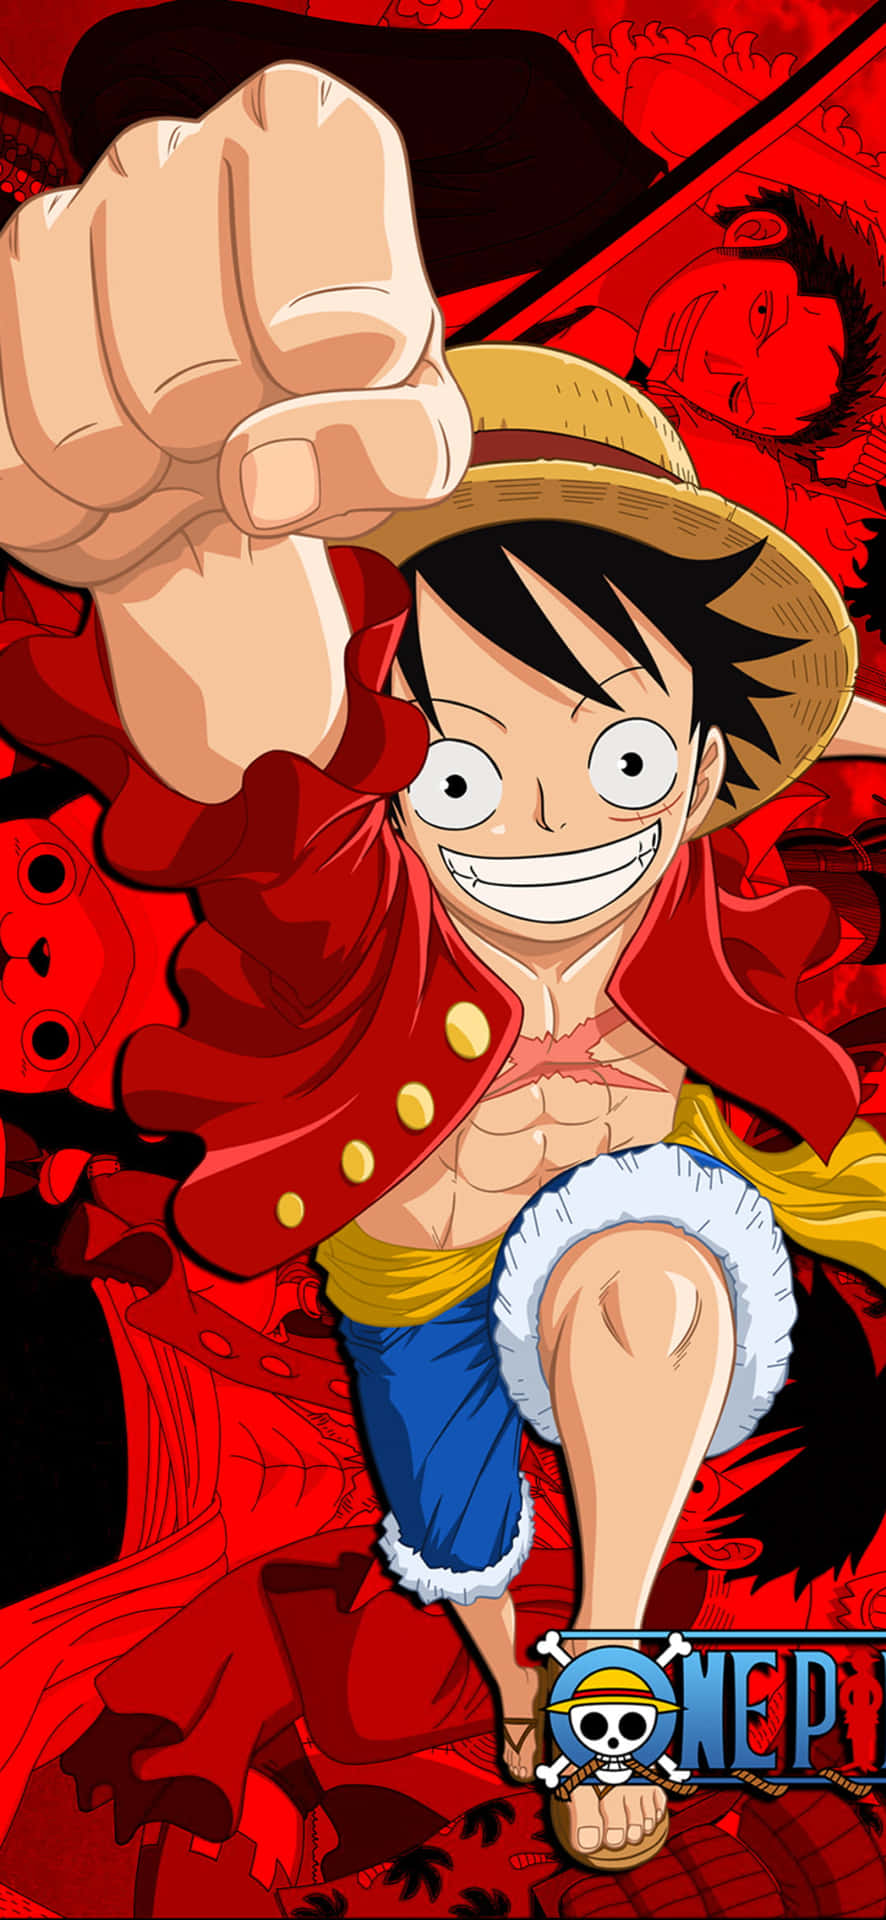 76jyFKSp one piece monkey d luffy hat anime wallpaper Poster Paper Print -  Decorative posters in India - Buy art, film, design, movie, music, nature  and educational paintings/wallpapers at Flipkart.com